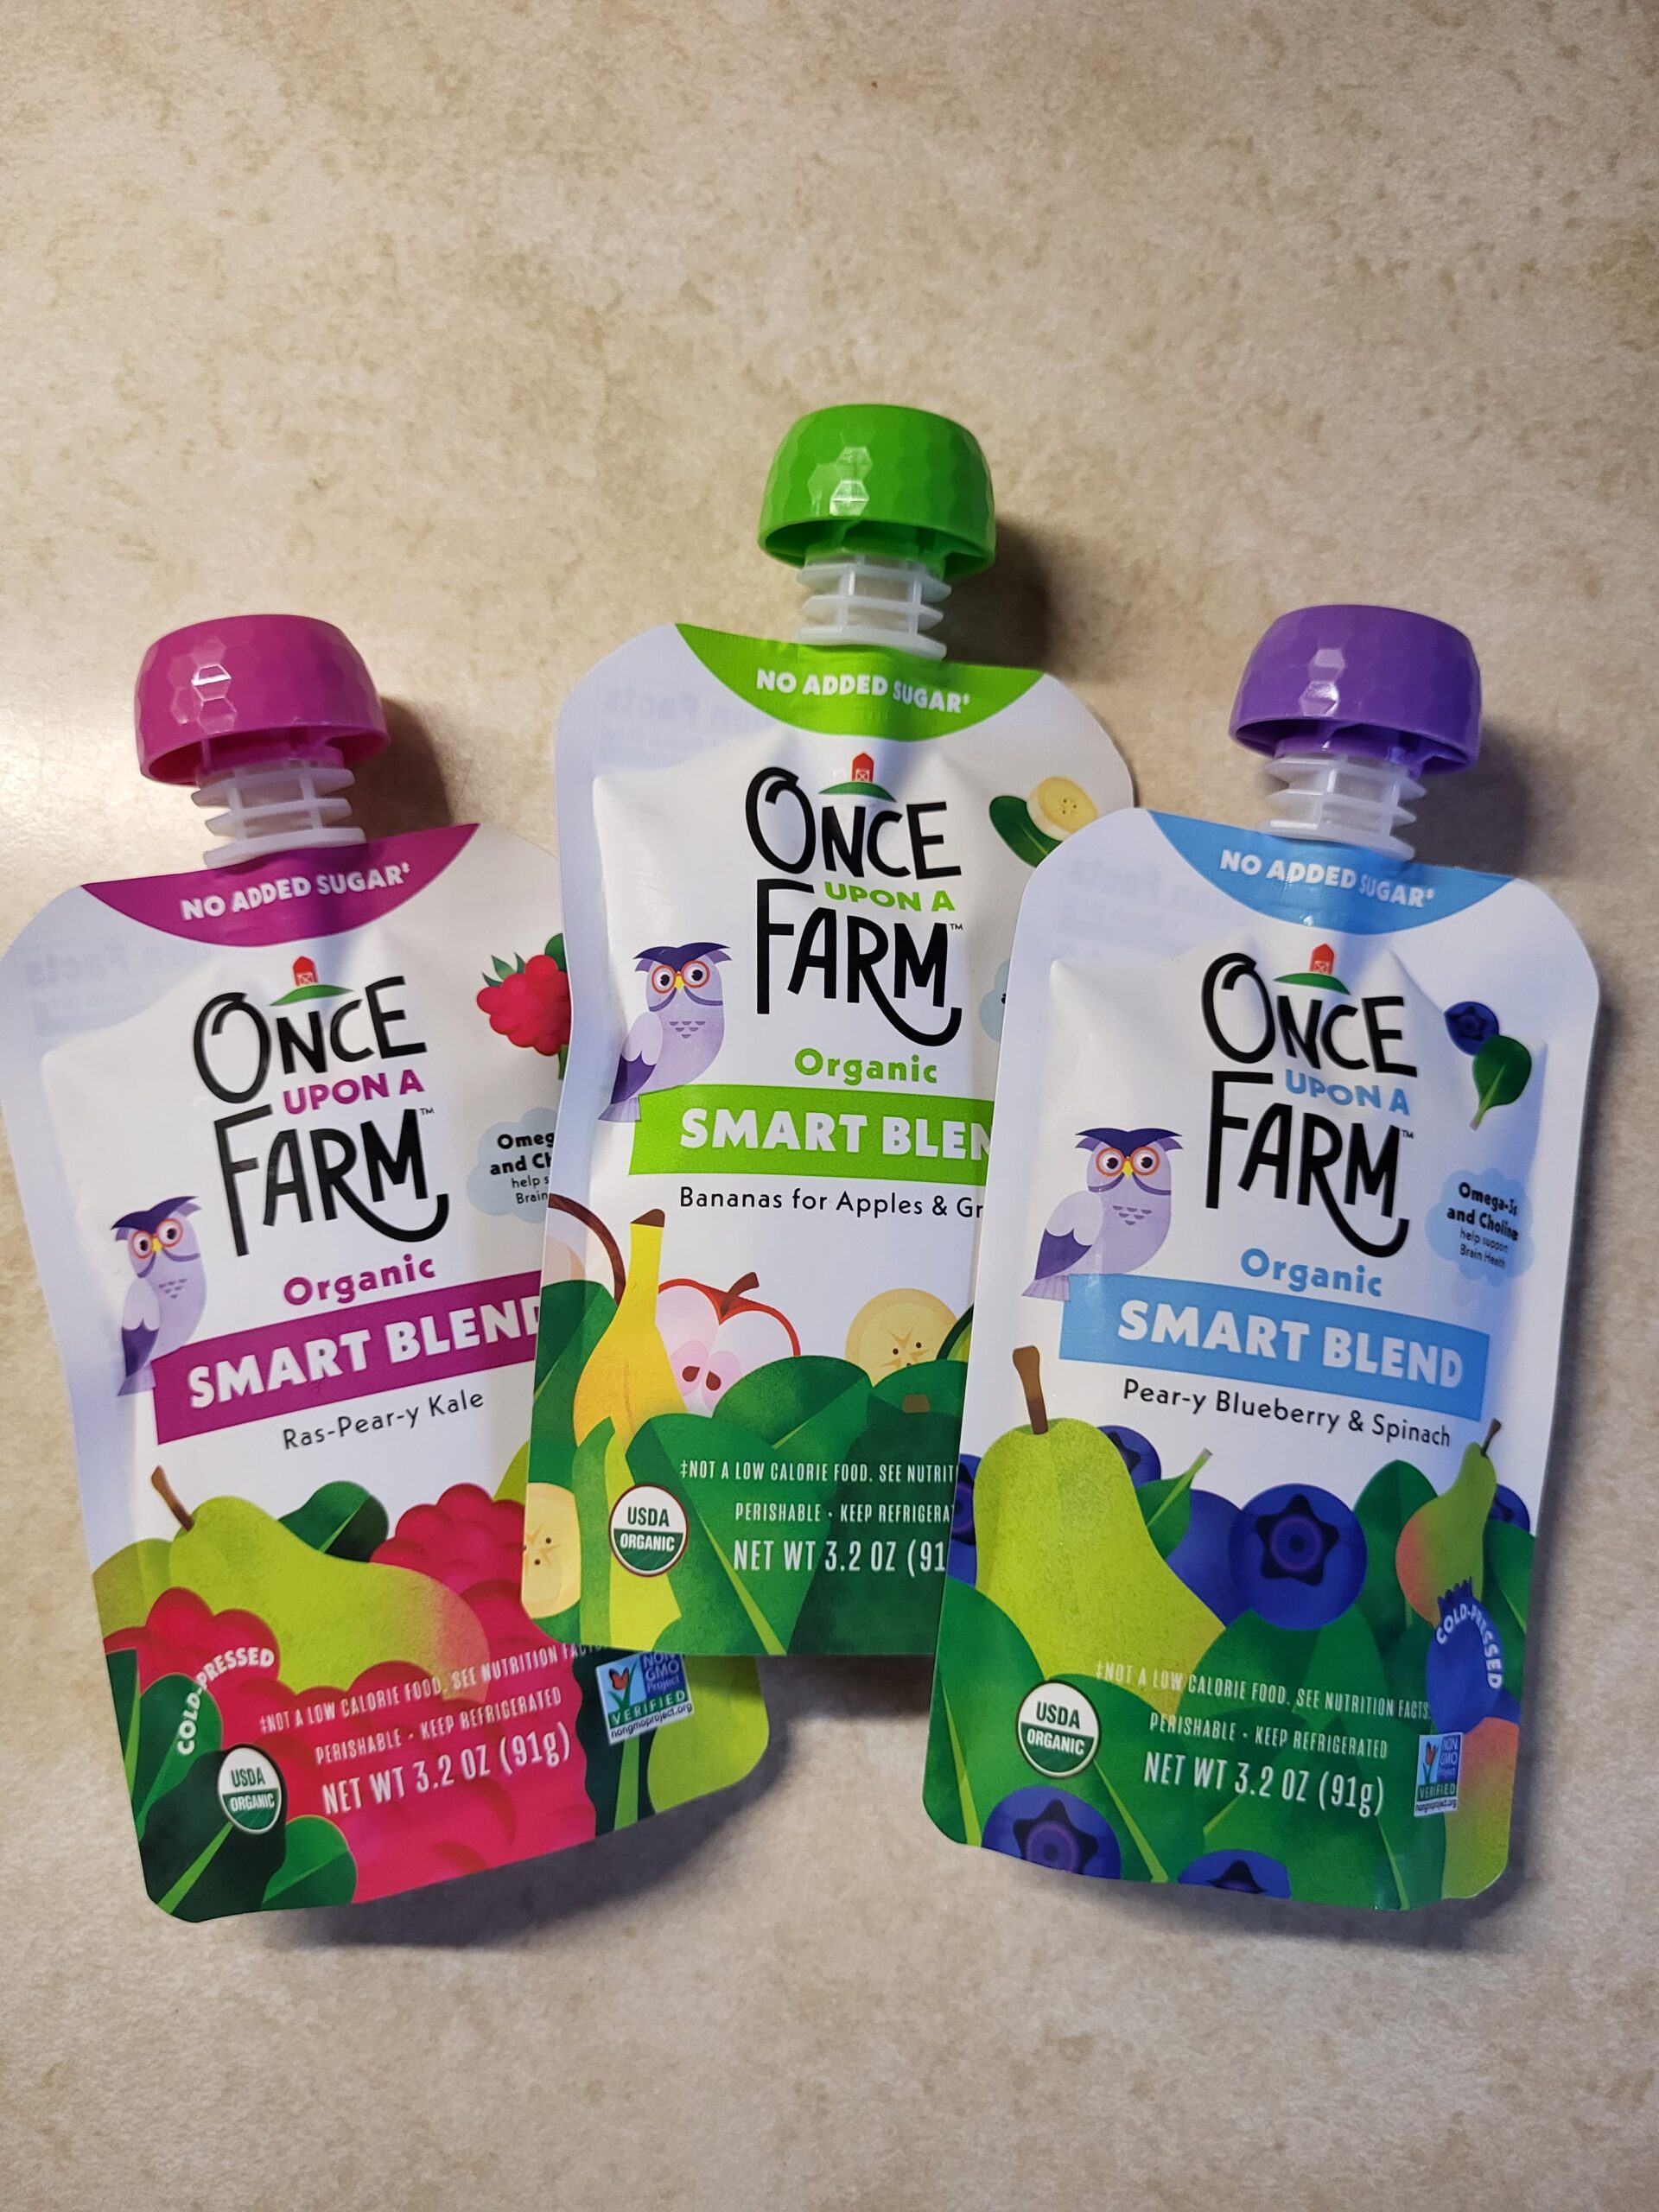 Once Upon a Farm pouches are one of our toddler's favorite things to eat.